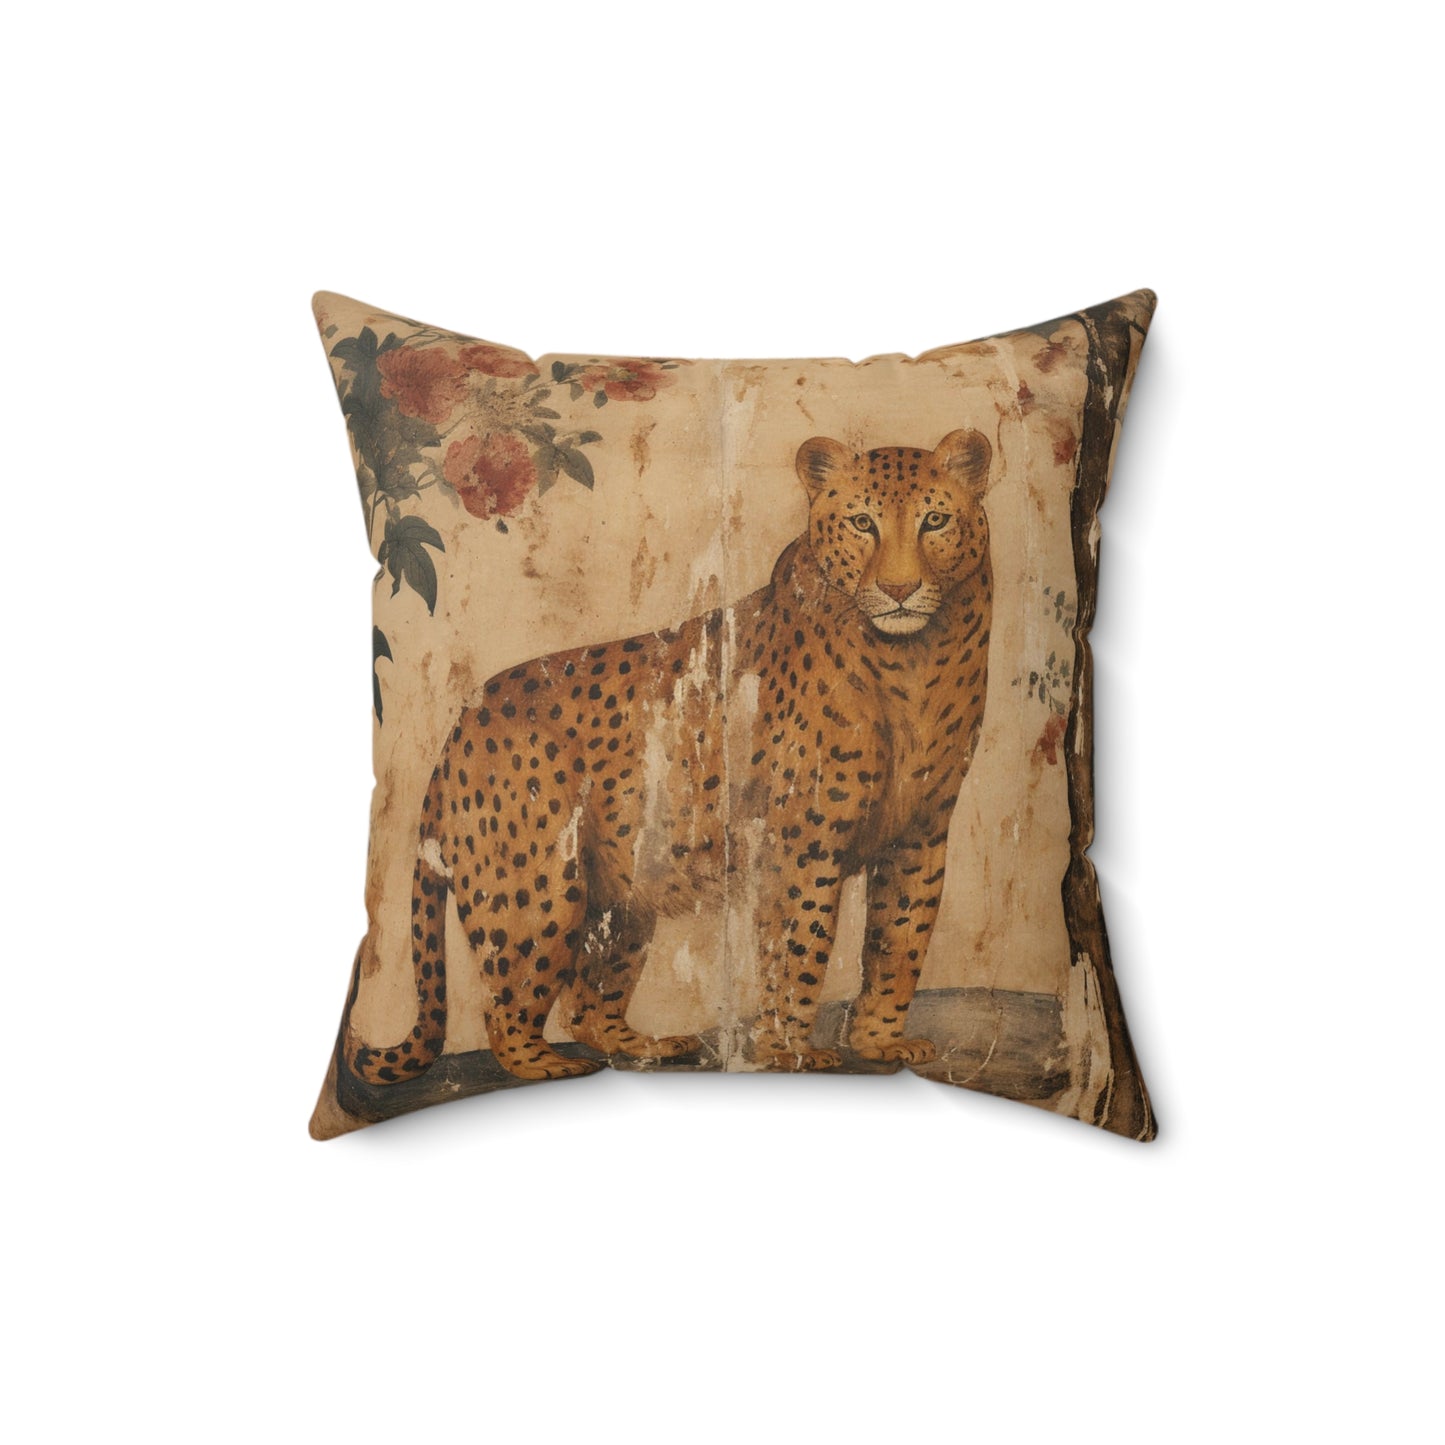 Leopard Square Pillow in Four Sizes